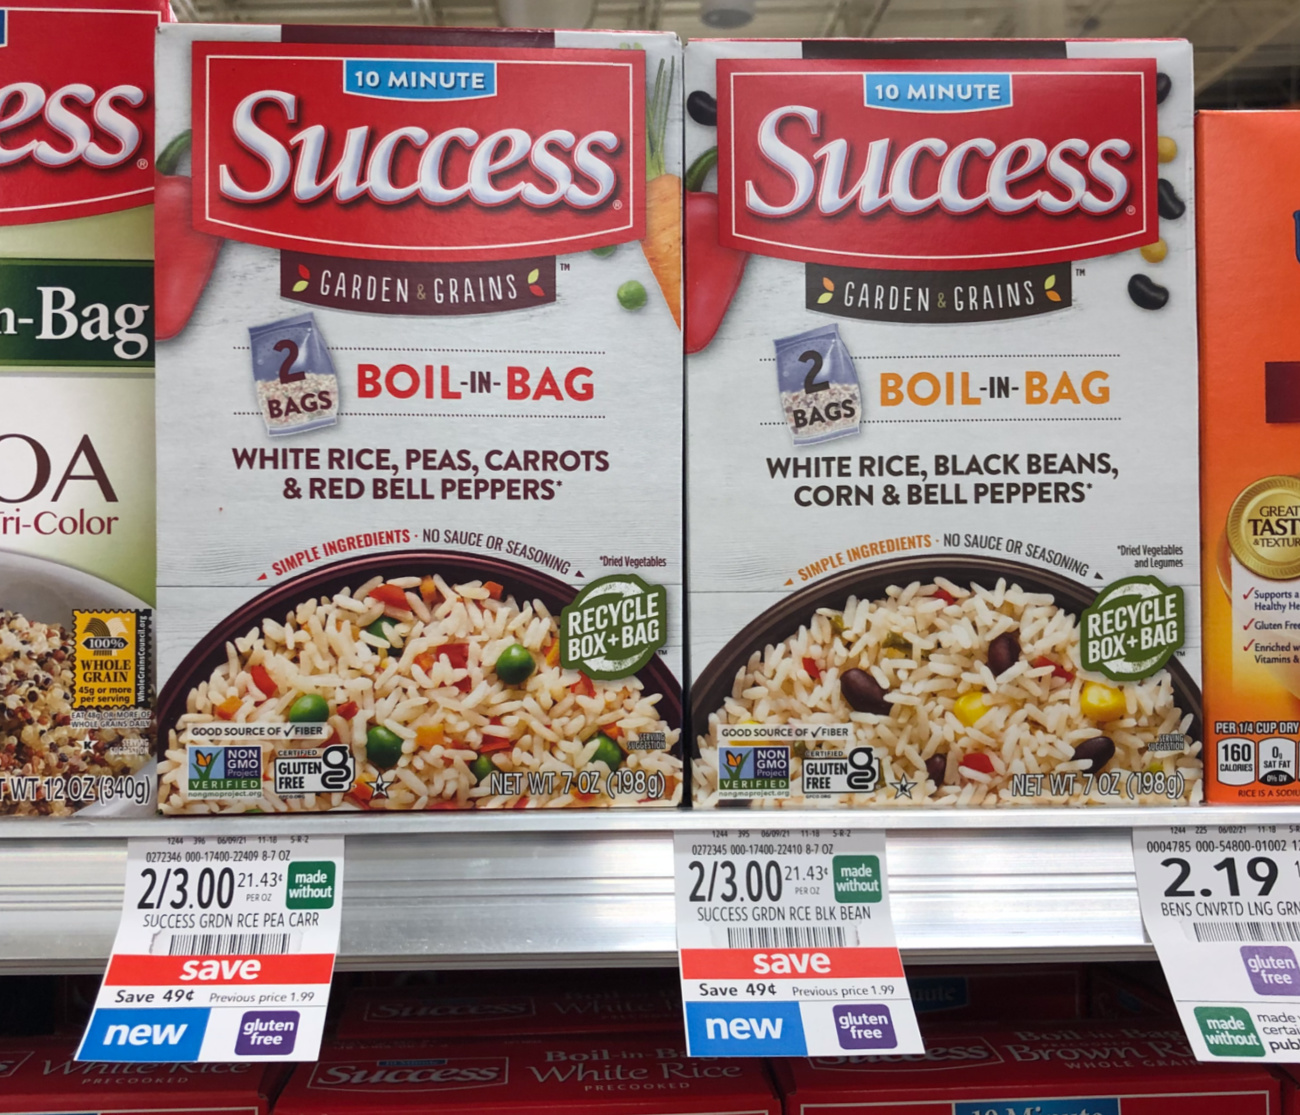 Save On New Success Garden & Grains™ Rice Blends And Try Them With My Margarita Shrimp & Rice Recipe on I Heart Publix